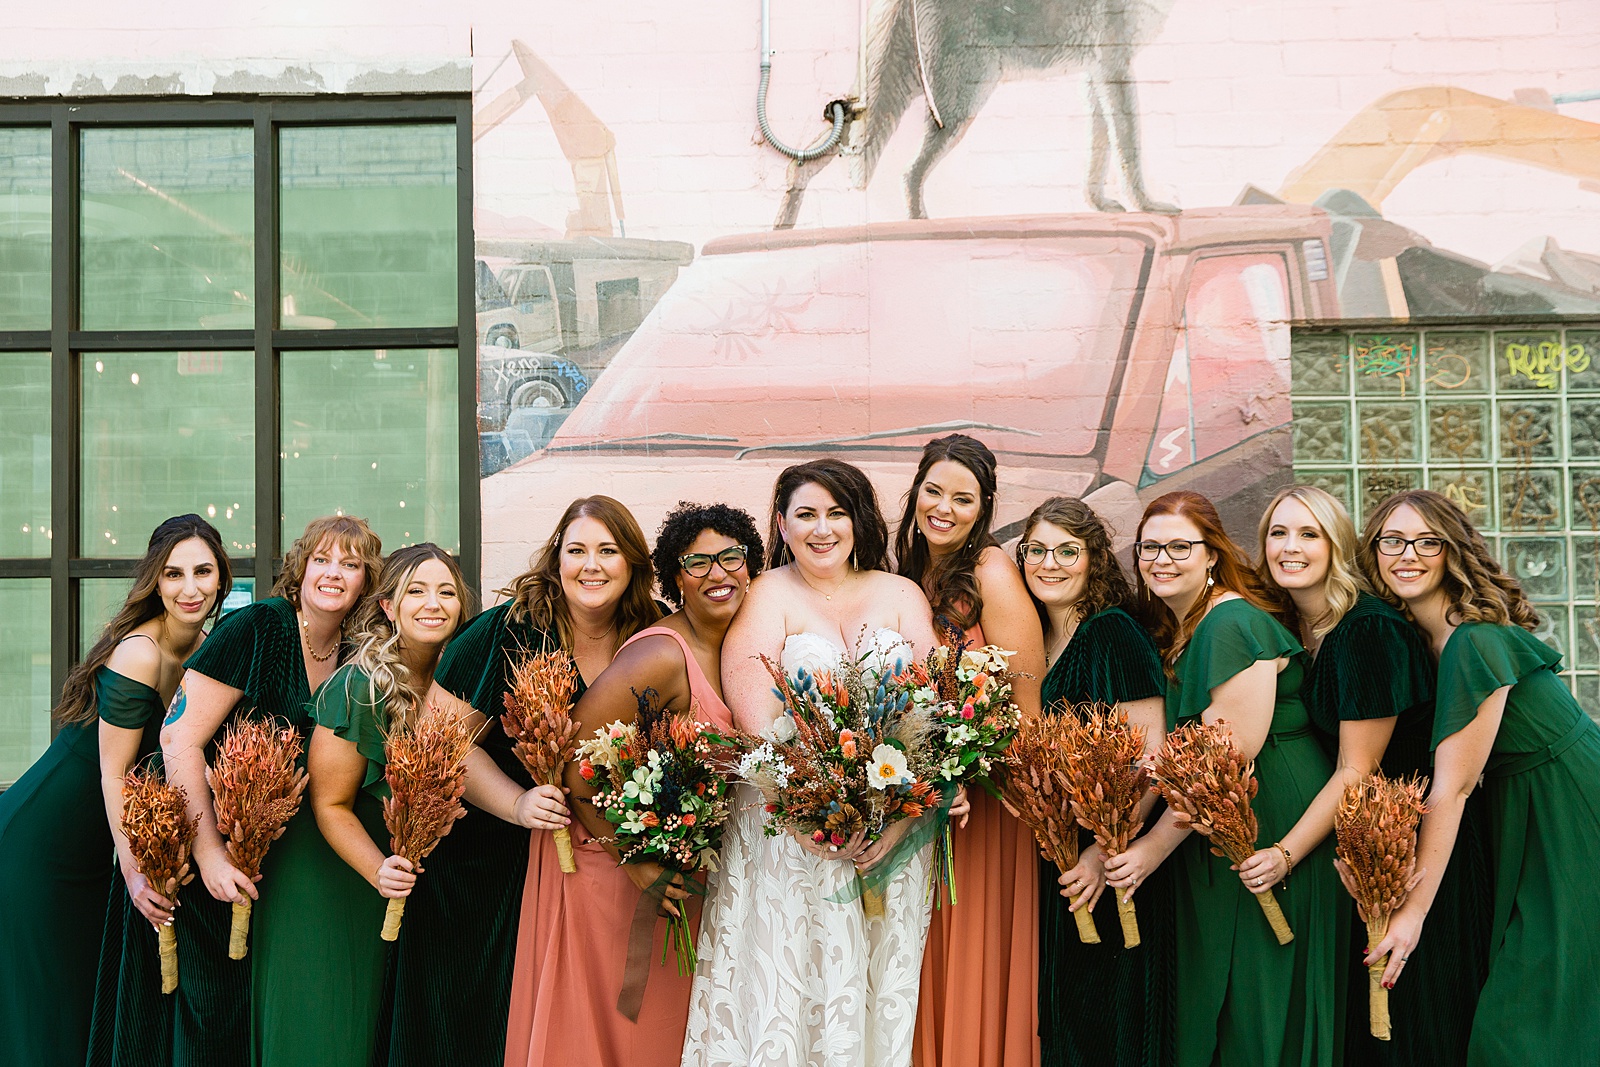 Bride and bridesmaids together at a MonOrchid wedding by Arizona wedding photographer PMA Photography.